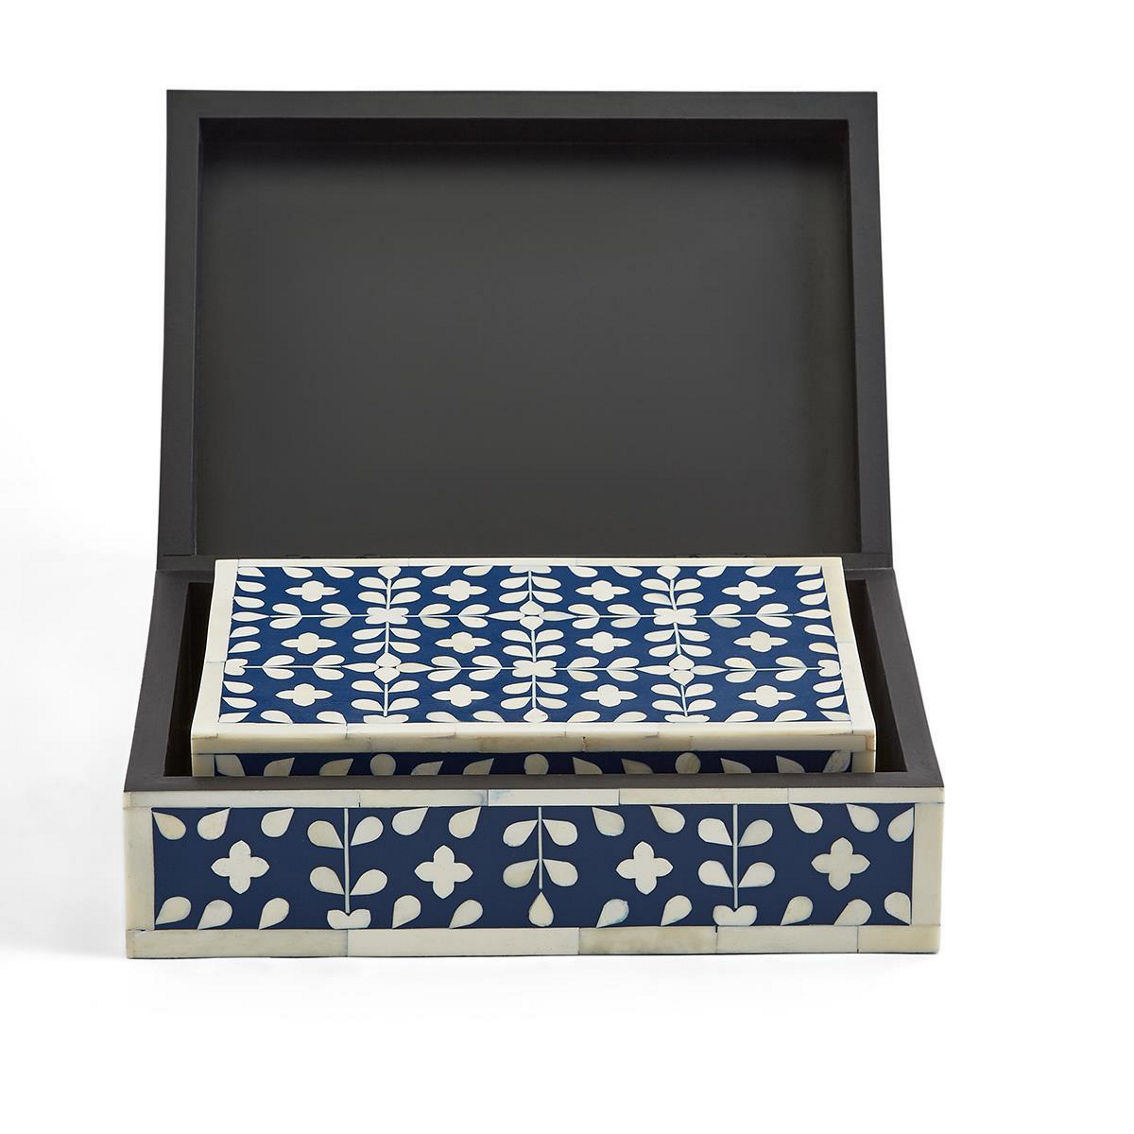 Tozai S/2 Flower and Petals Blue/White Tear Cover Box - Image 4 of 4